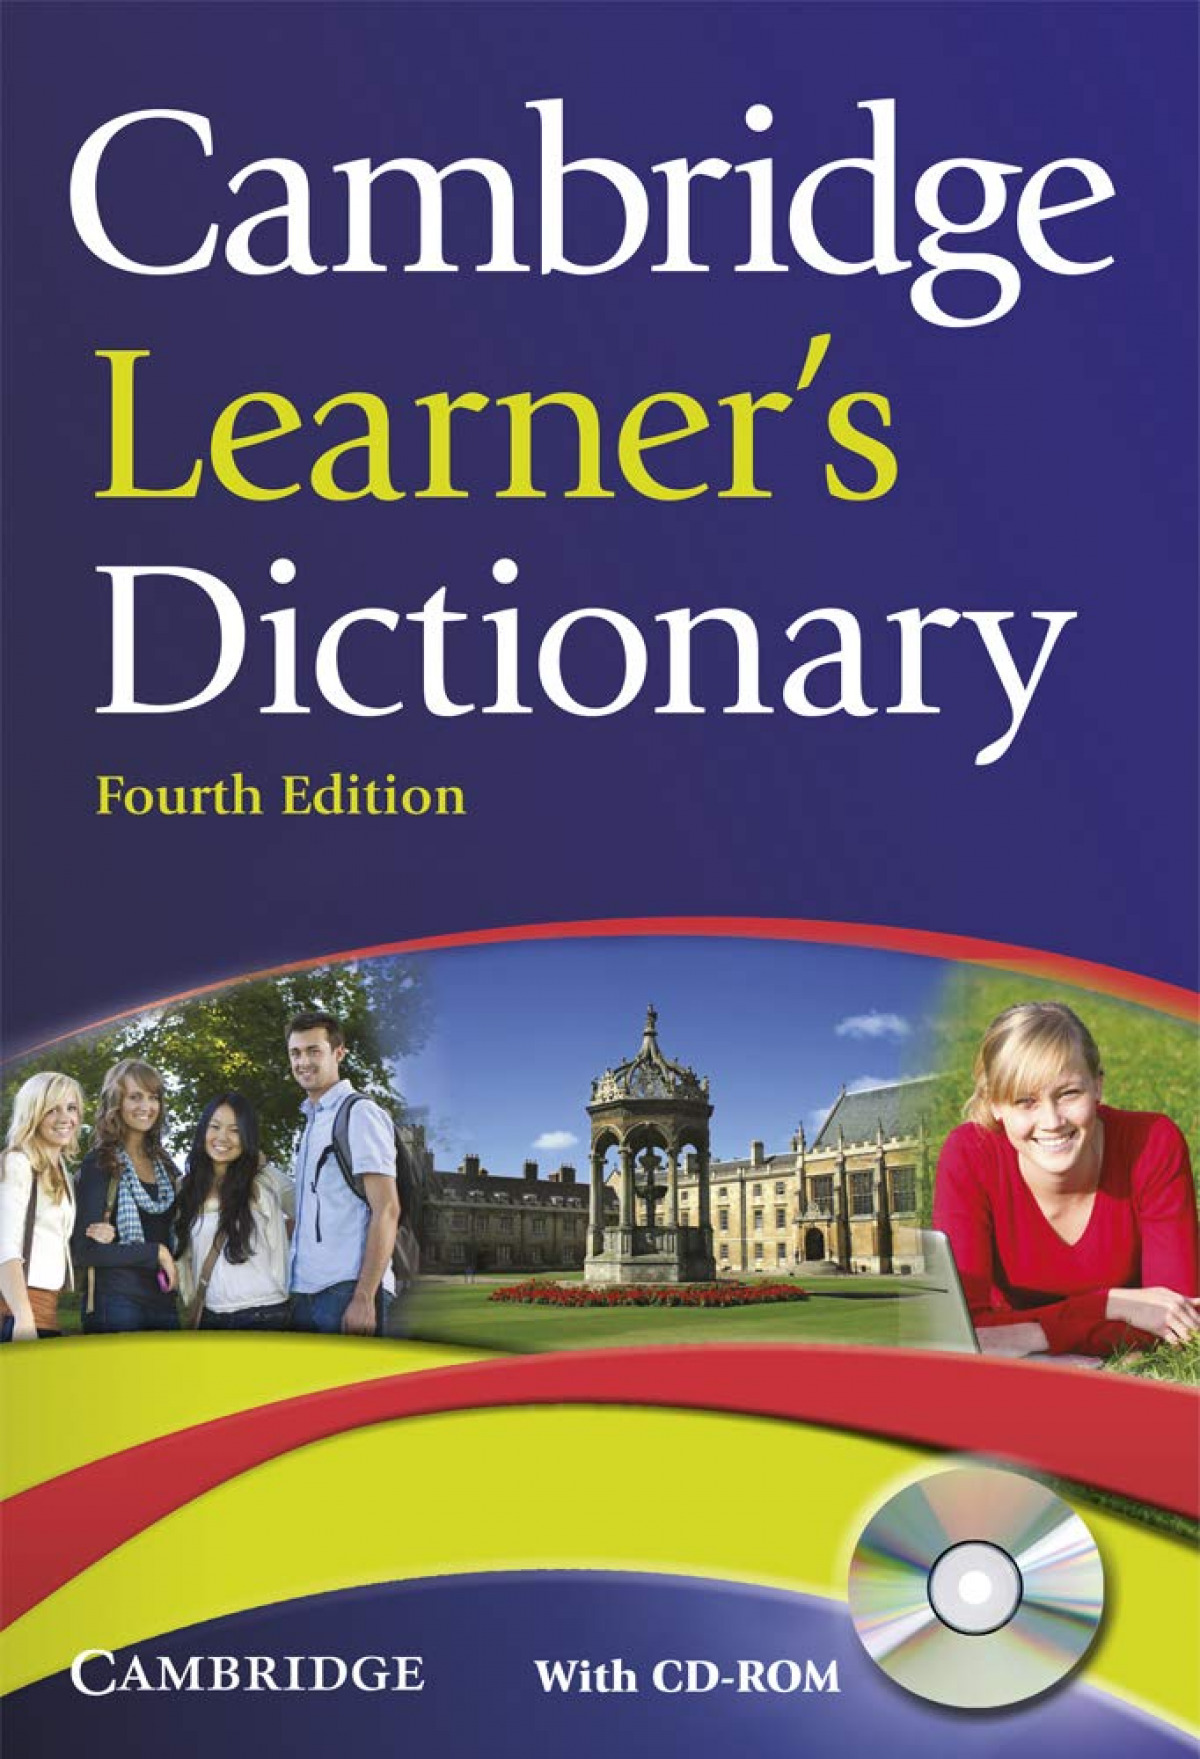 Cambridge　Edition　Exam　CD-ROM　with　Learner's　English　Centre　Dictionary　4th